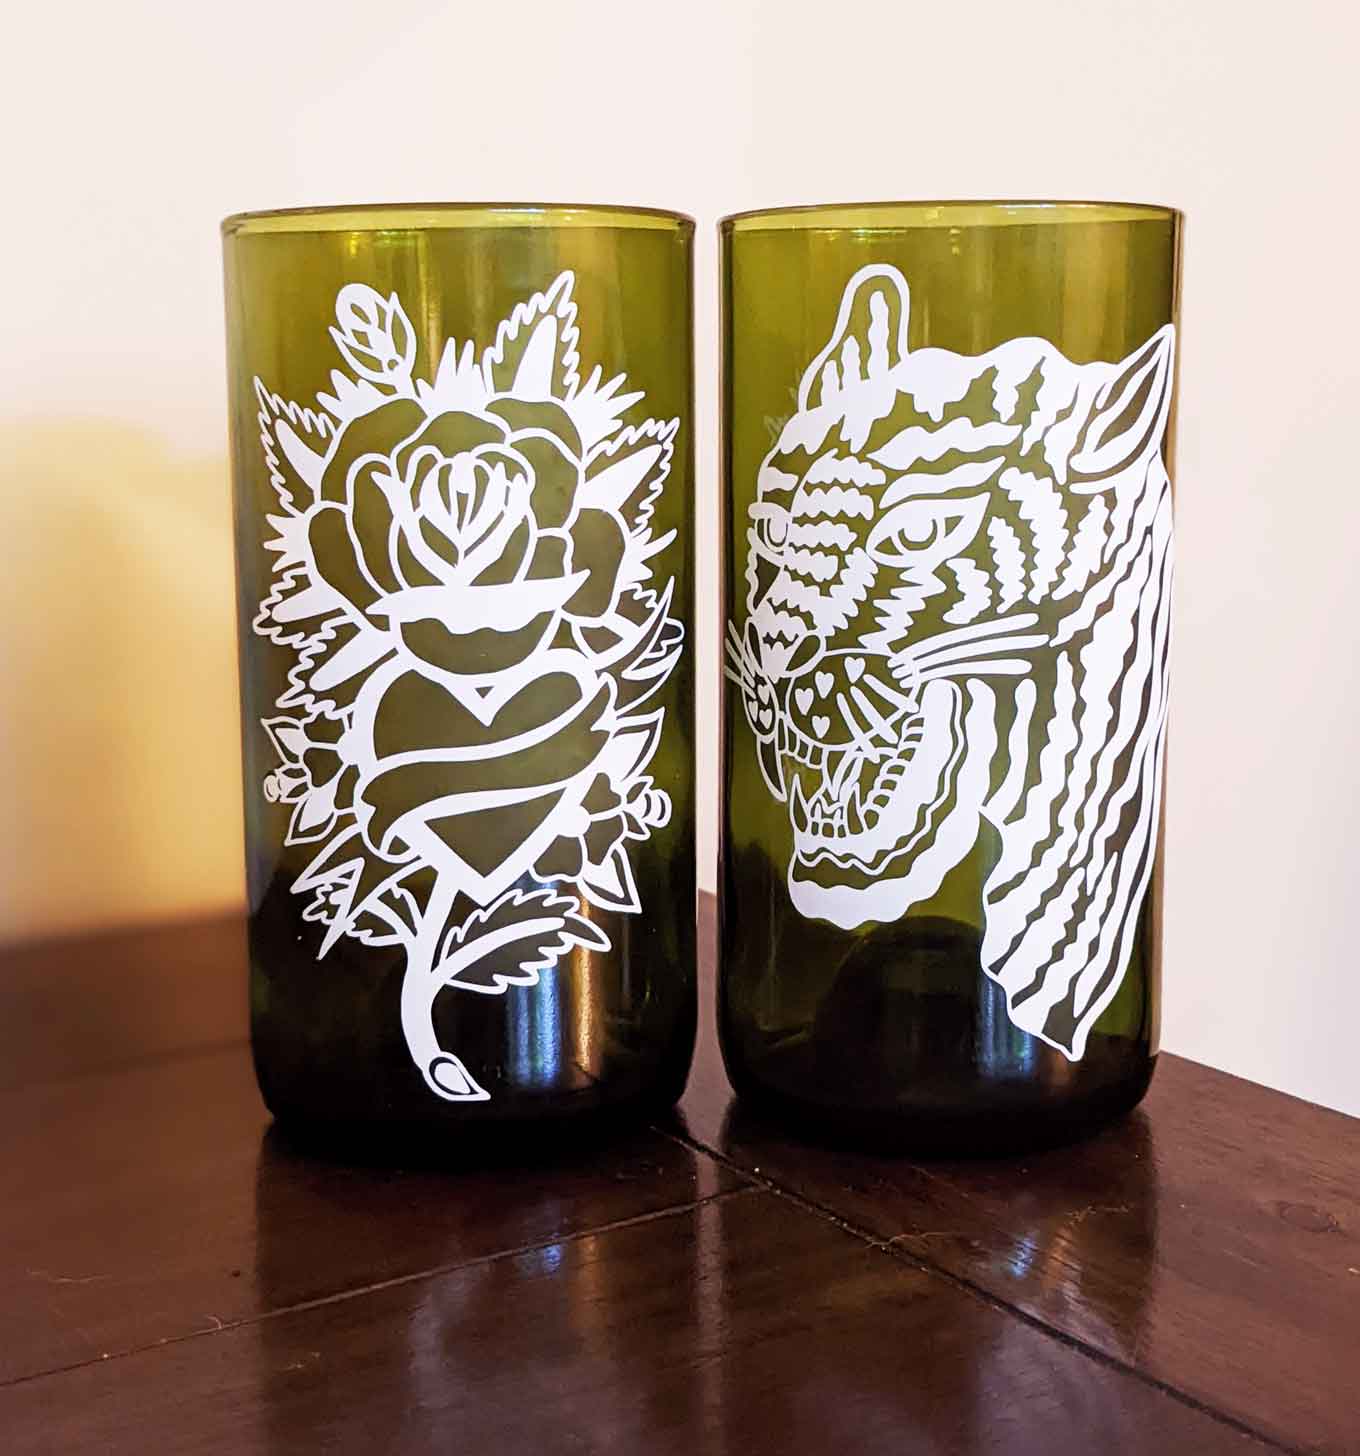 Two green recycled glasses, one with a flower design printed on it and other with a tiger design